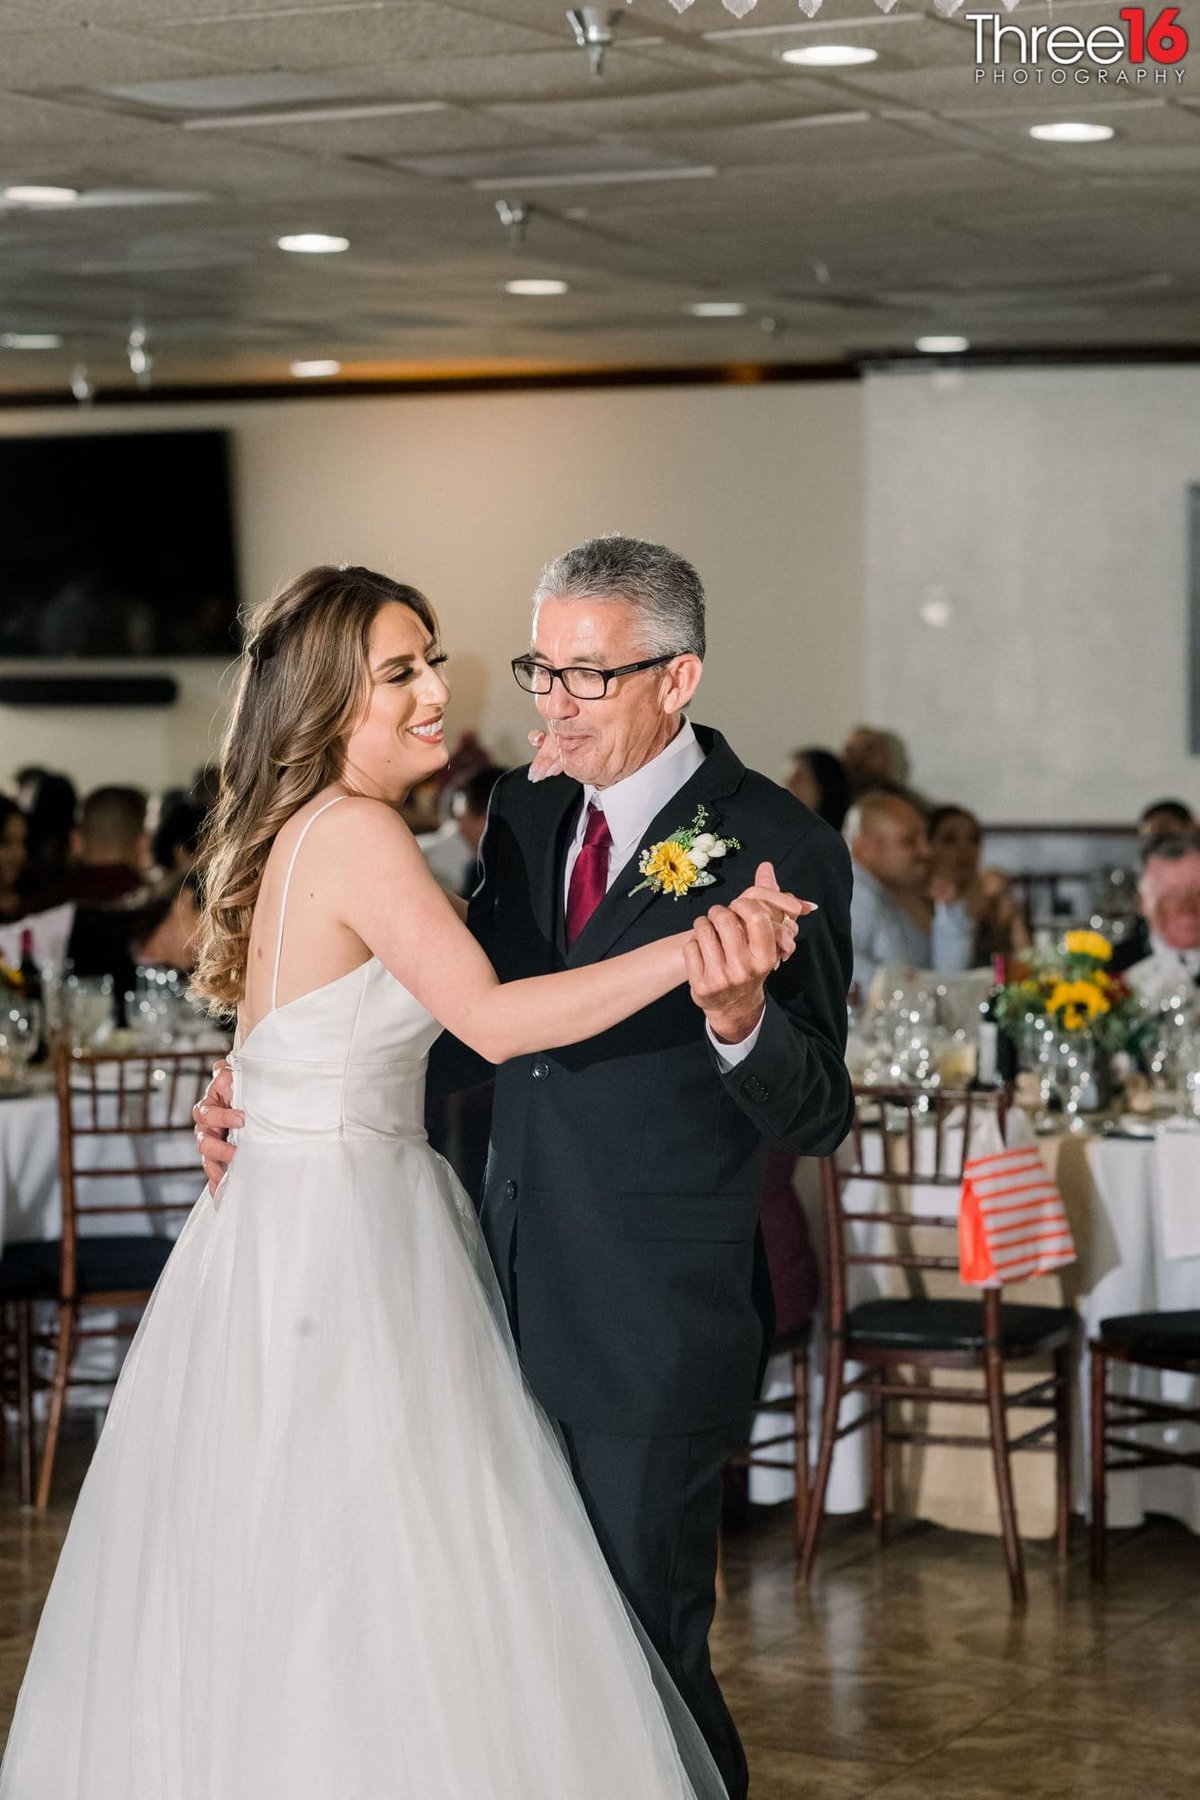 Bride and her father dance during her wedding reception at the Casa Bella Wedding Venue